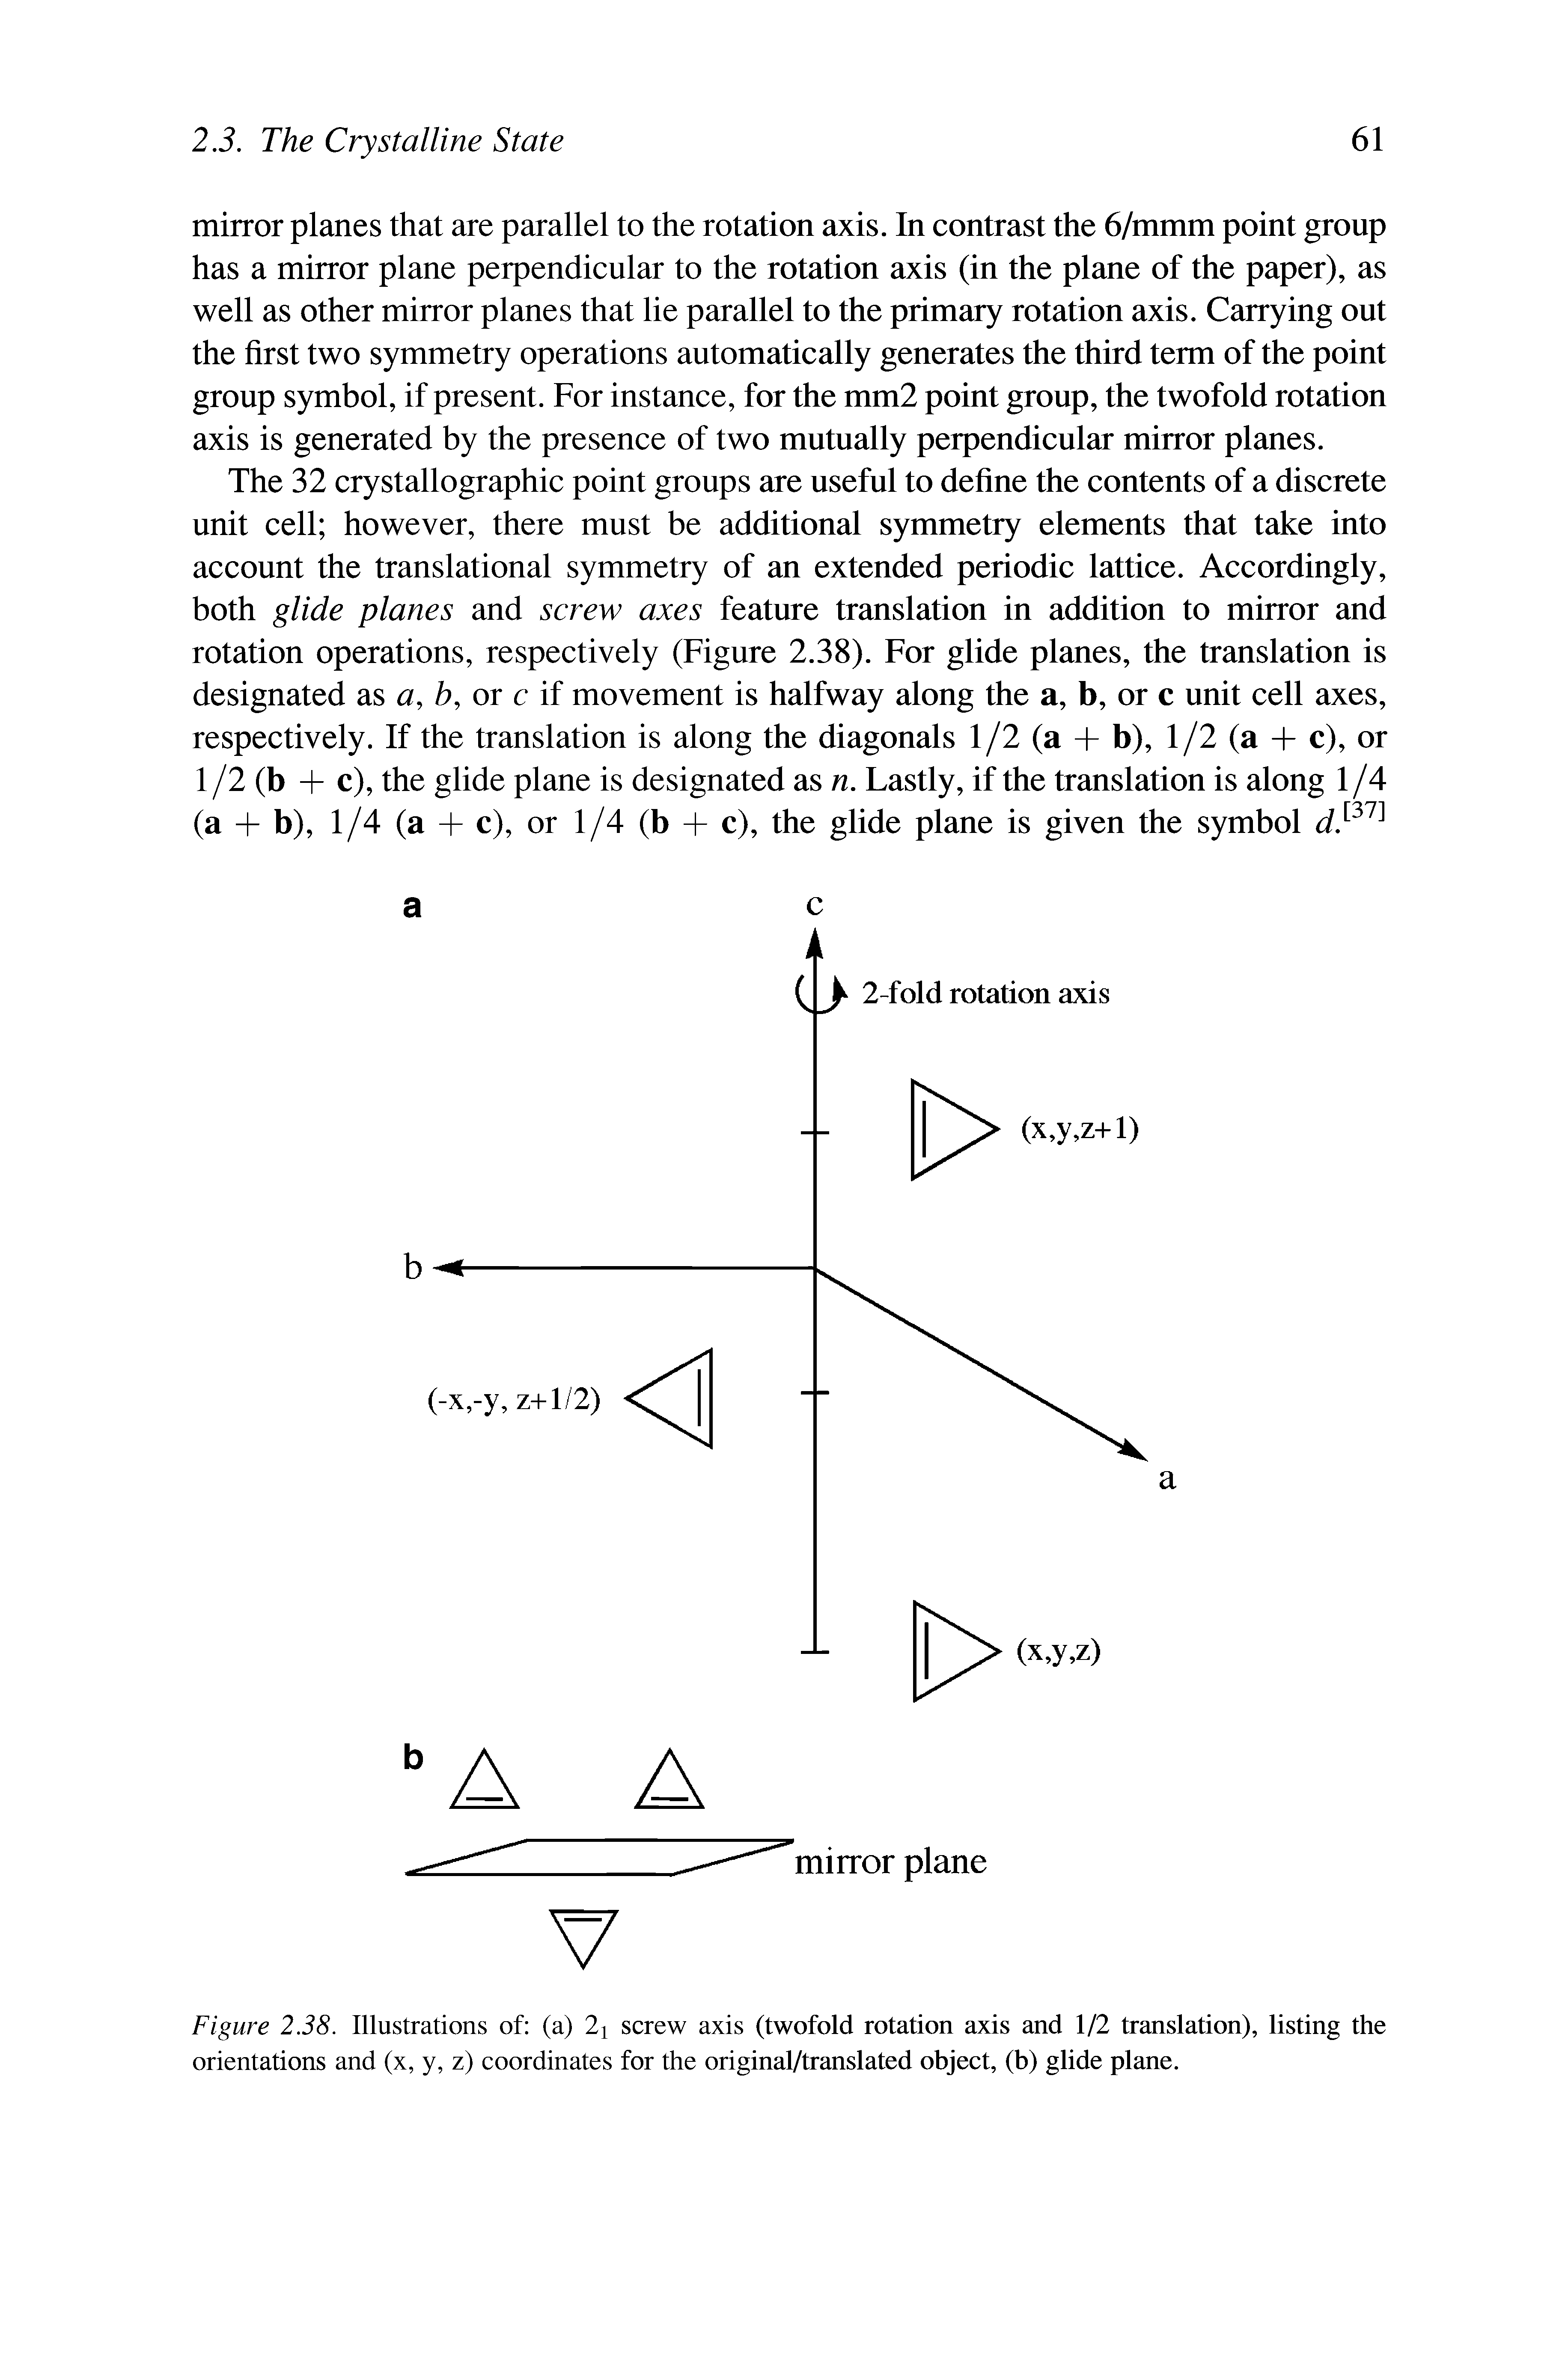 Figure 238. Illustrations of (a) 2i screw axis (twofold rotation axis and 1/2 translation), listing the orientations and (x, y, z) coordinates for the original/translated object, (b) glide plane.